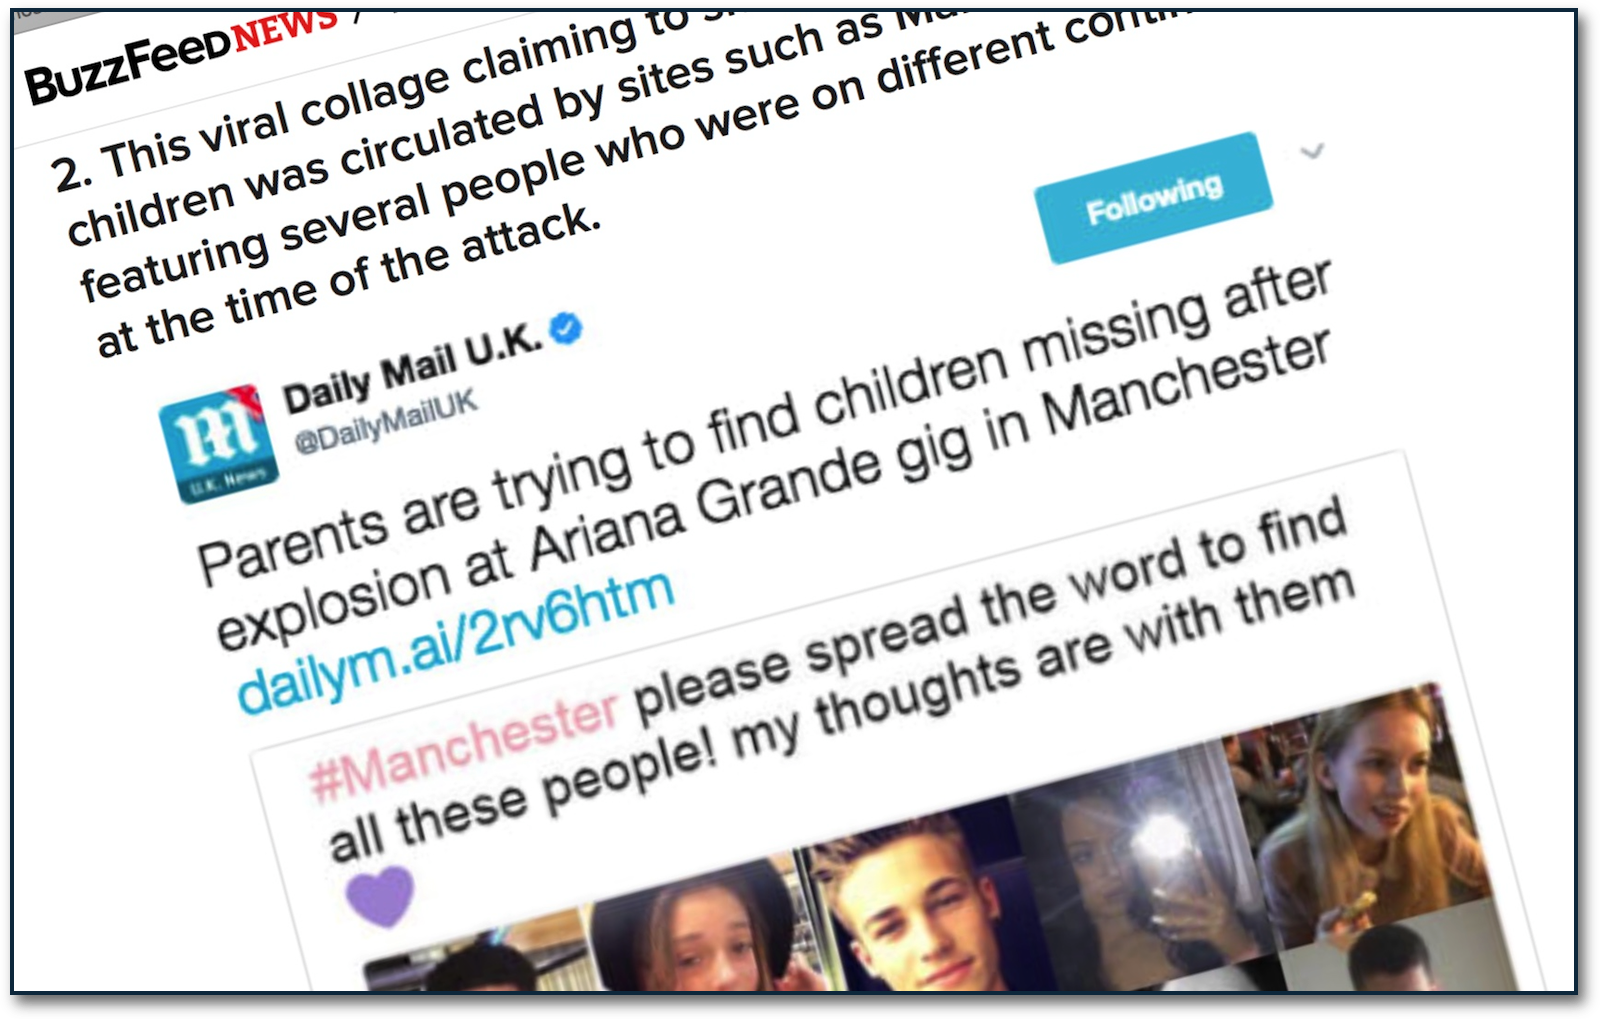 Debunking the viral hoaxes after the Manchester bombing